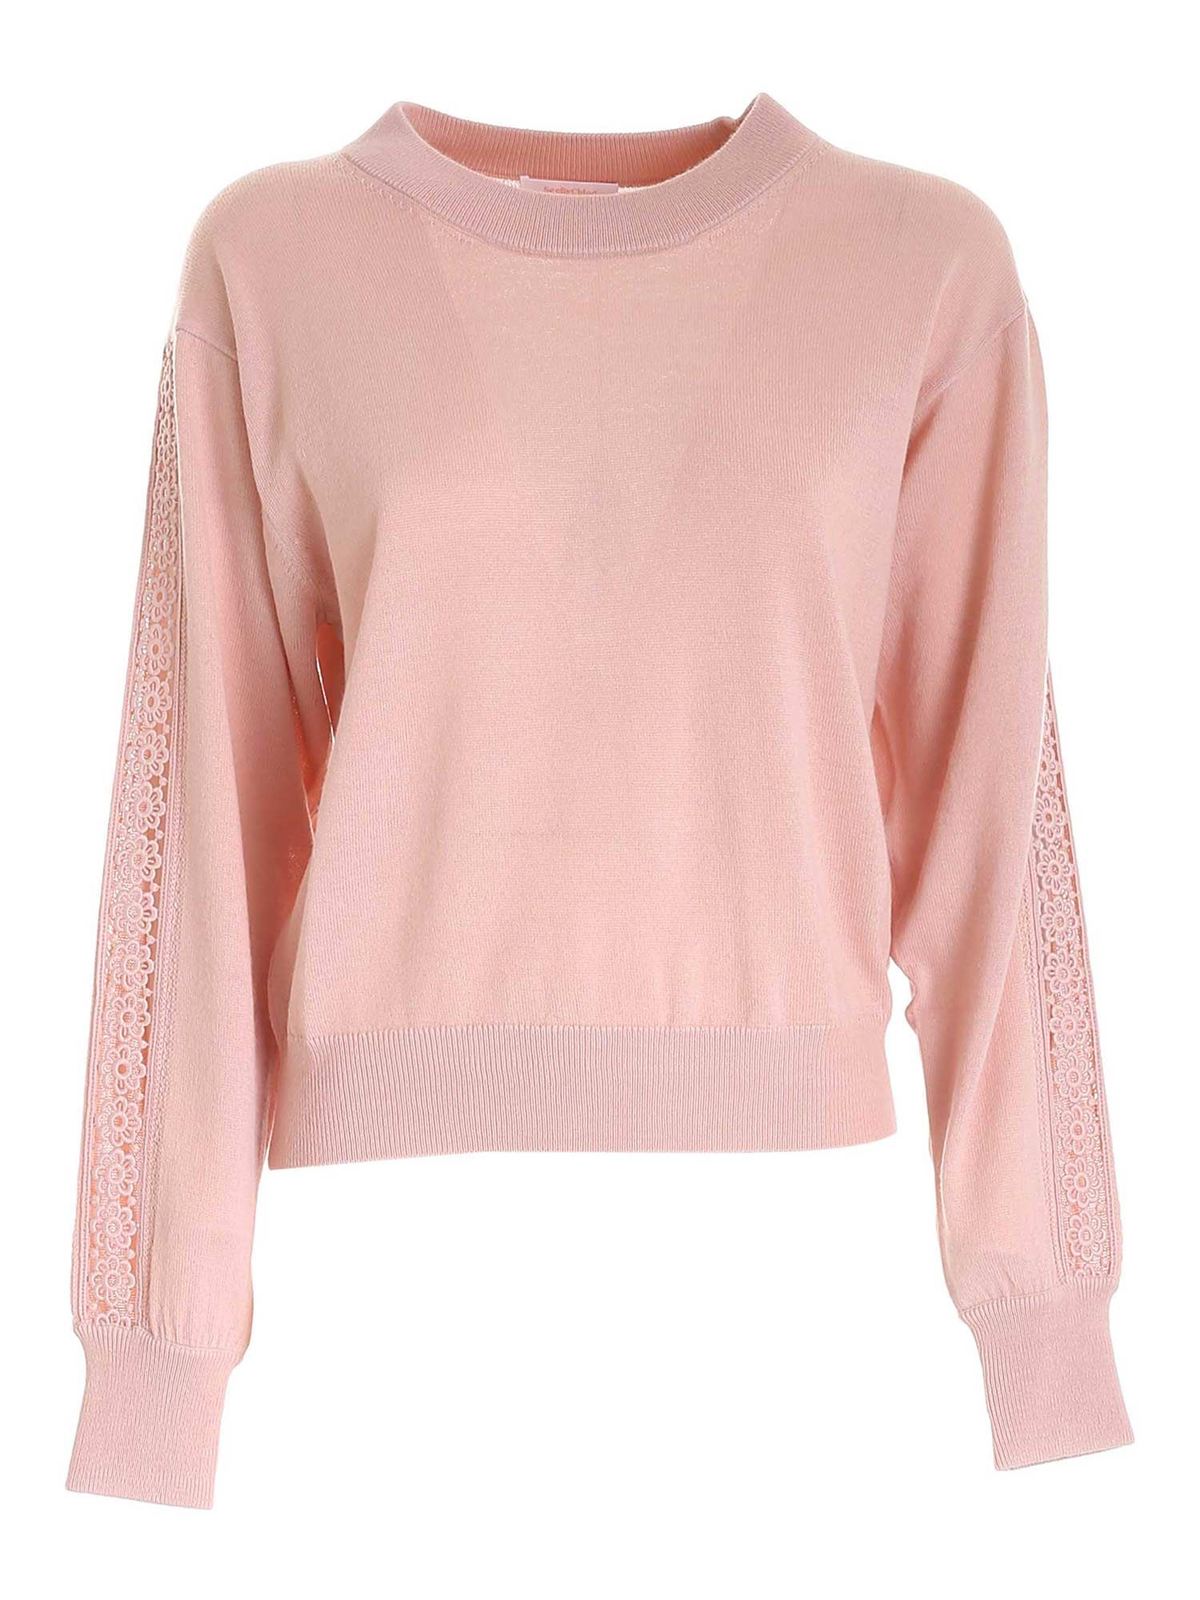 See By Chloé Embroidered Insert Sweater In Cameo Rose Colo In Rosado